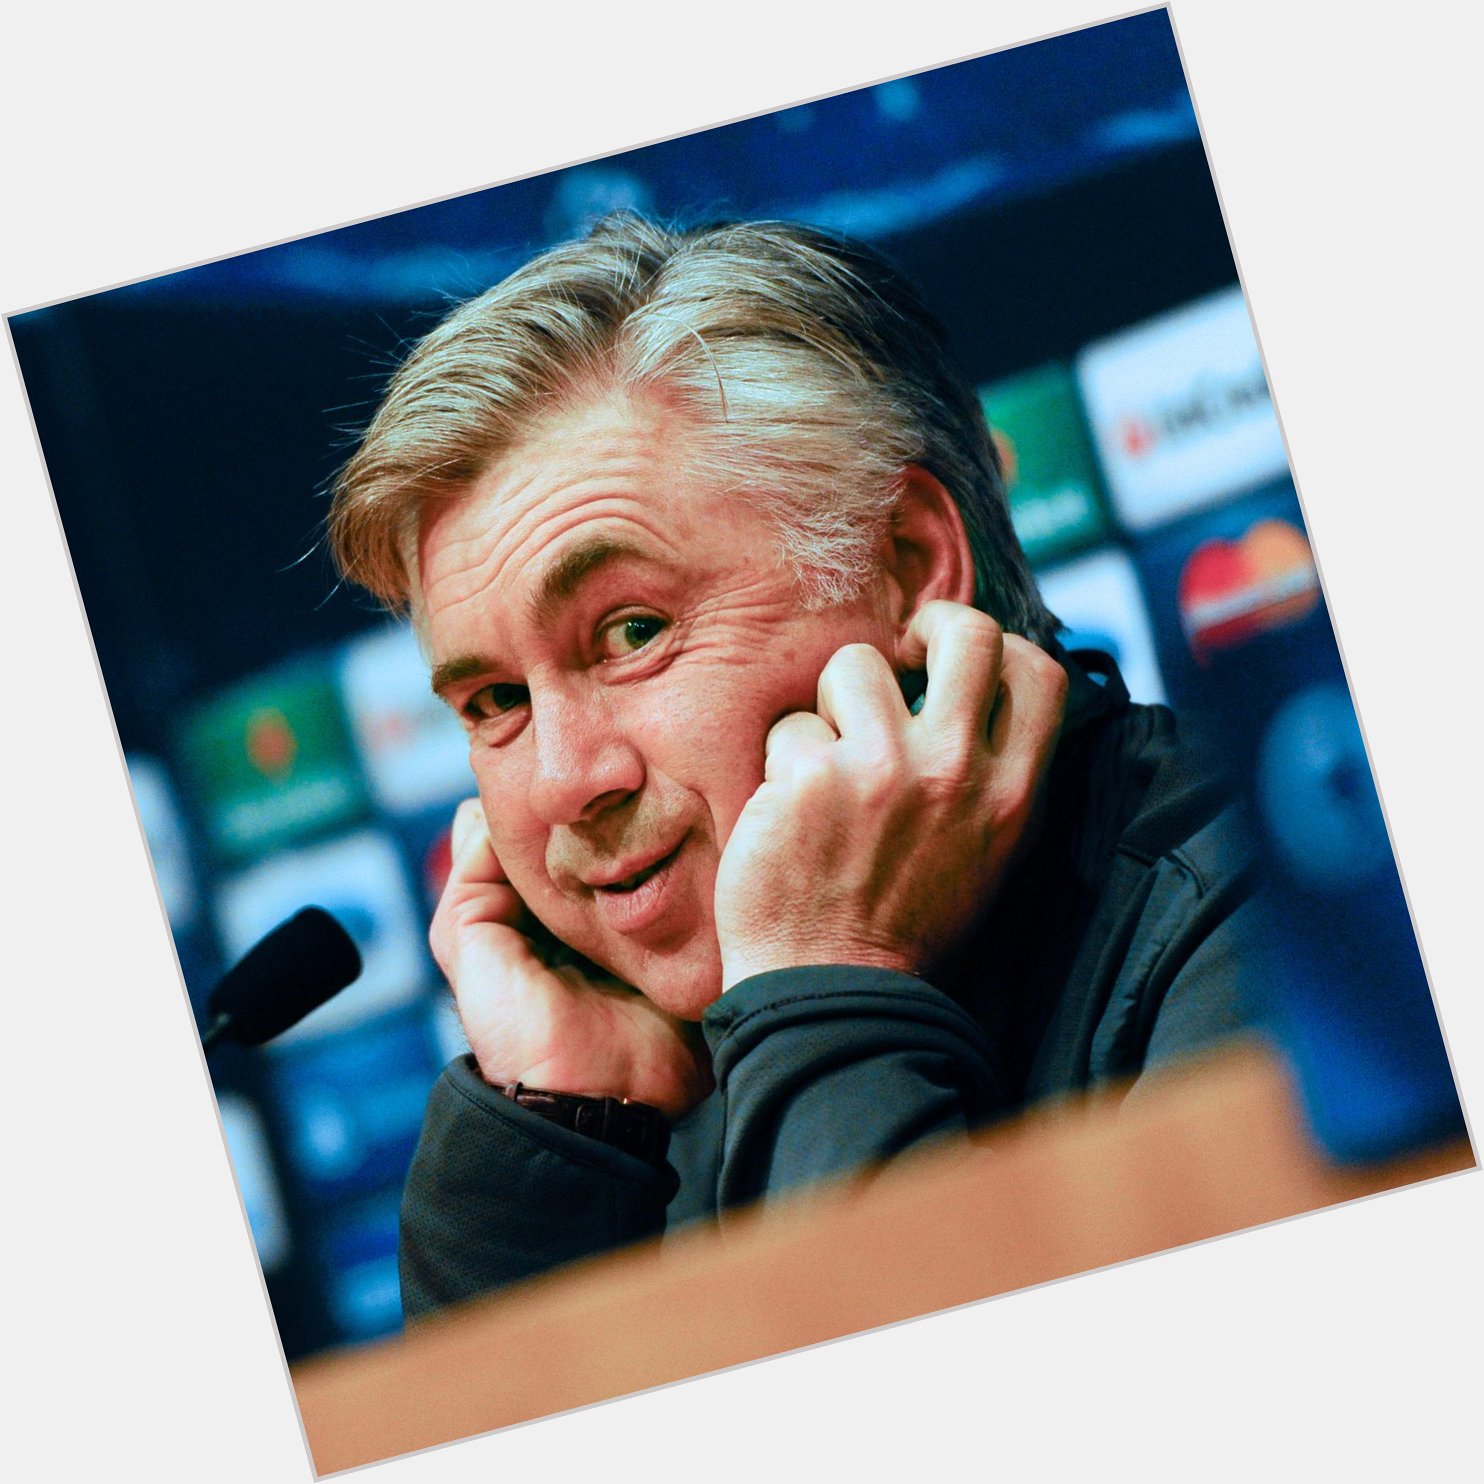 Happy birthday, Carlo Ancelotti! -   Champions League Trophies
- League titles in              